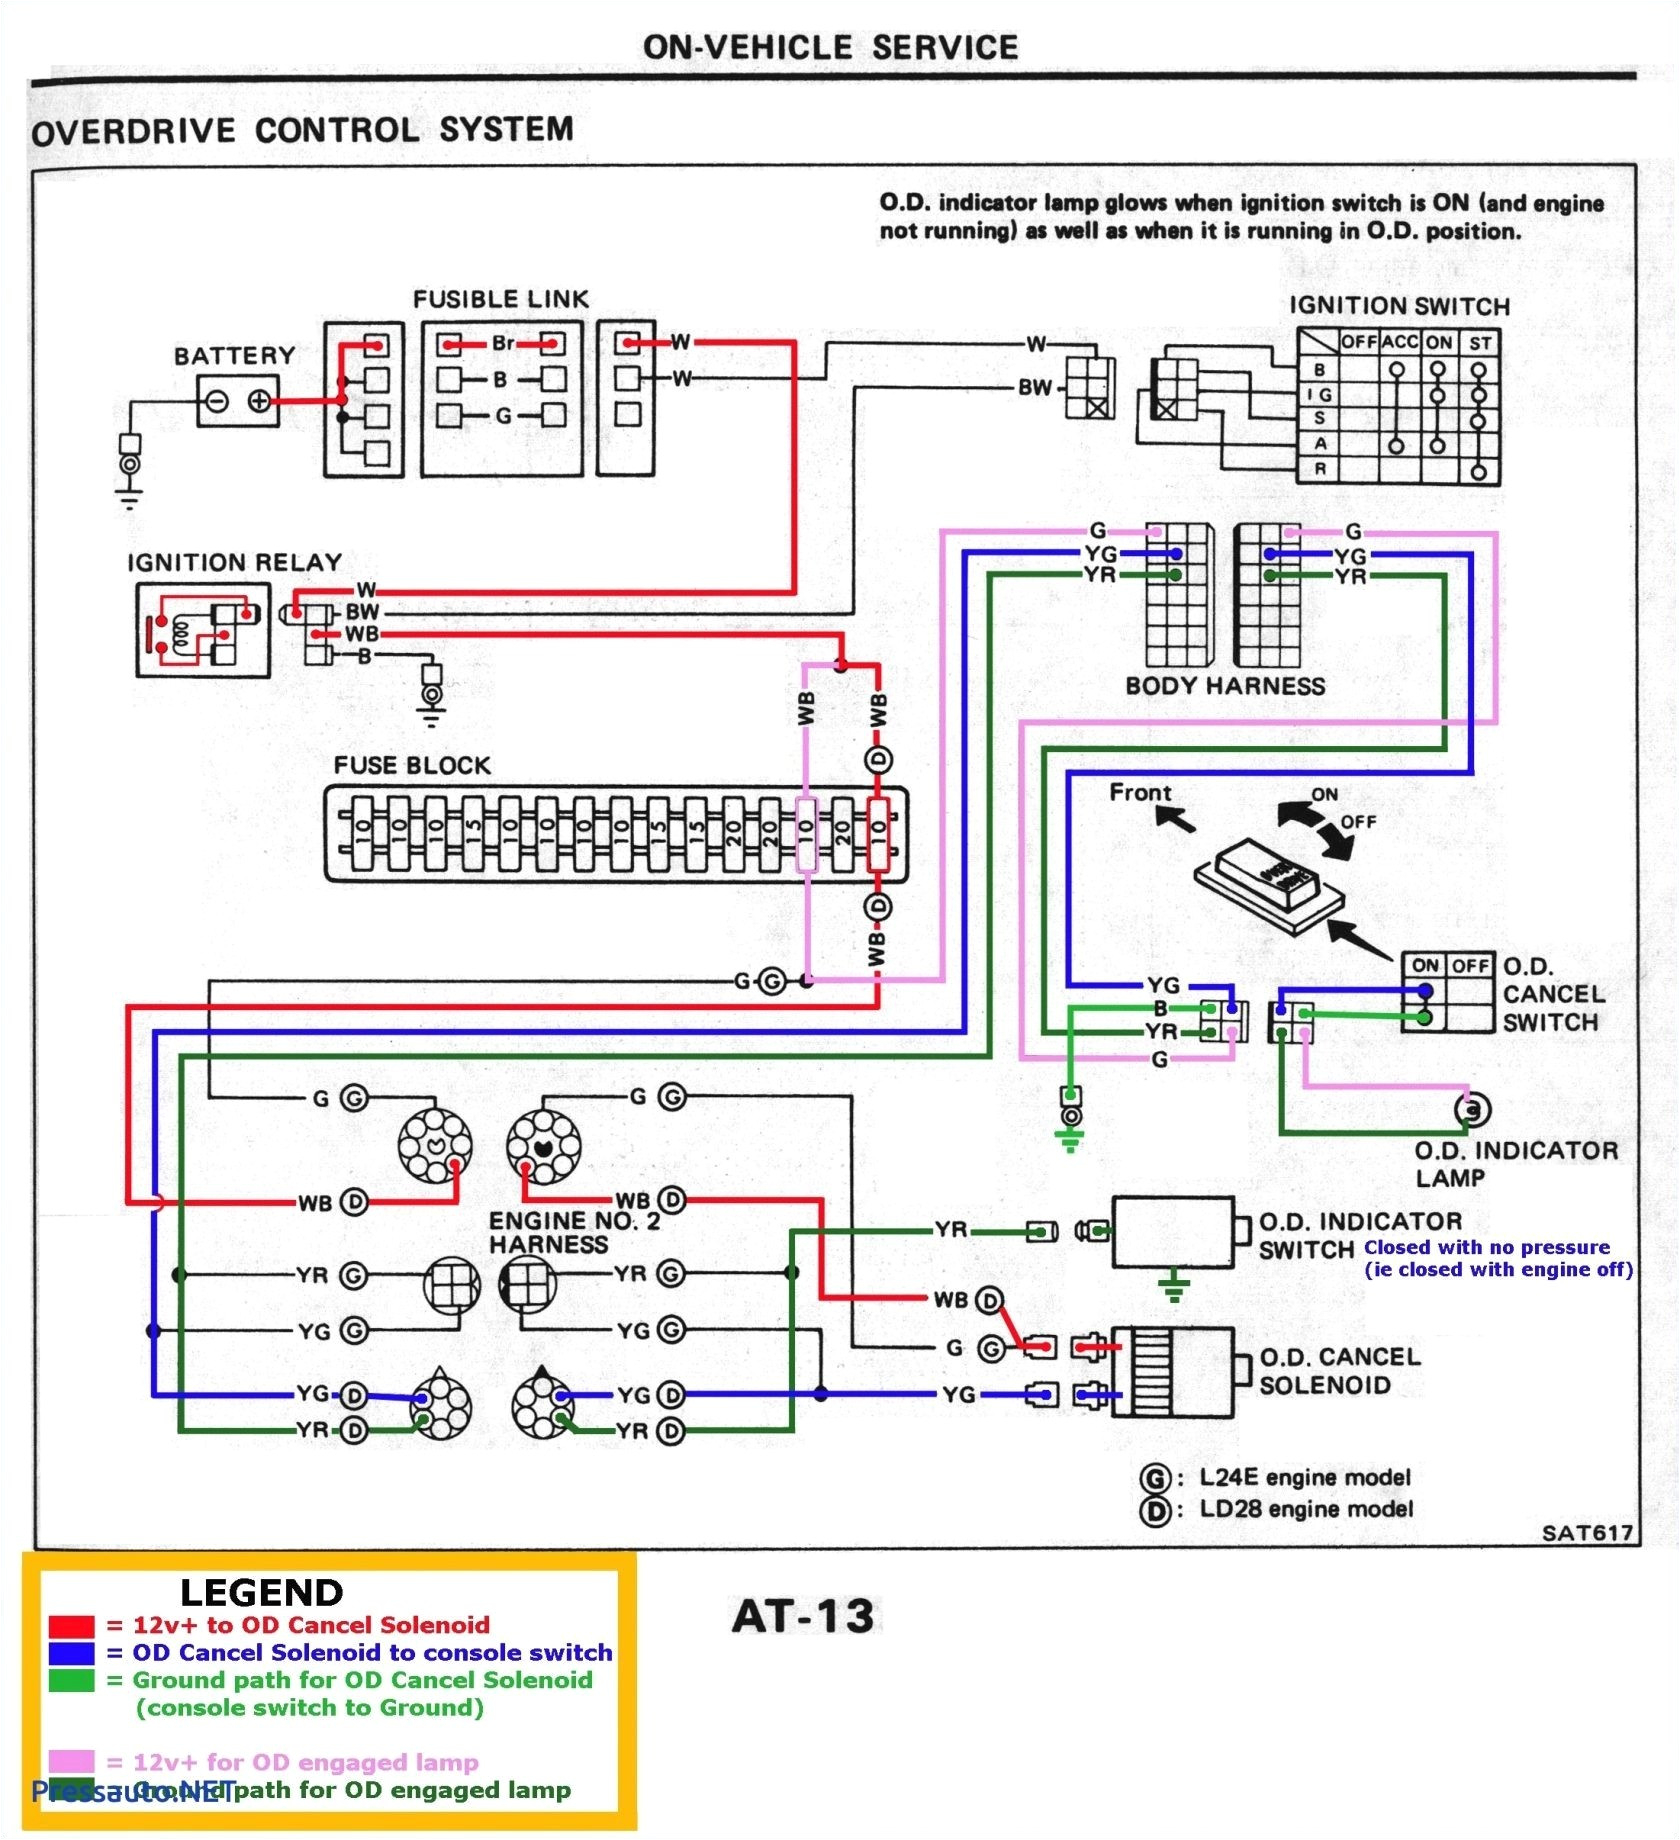 blower motor wiring diagram awesome wire a ceiling fan 4 wire emerson fan motor wiring diagram of the